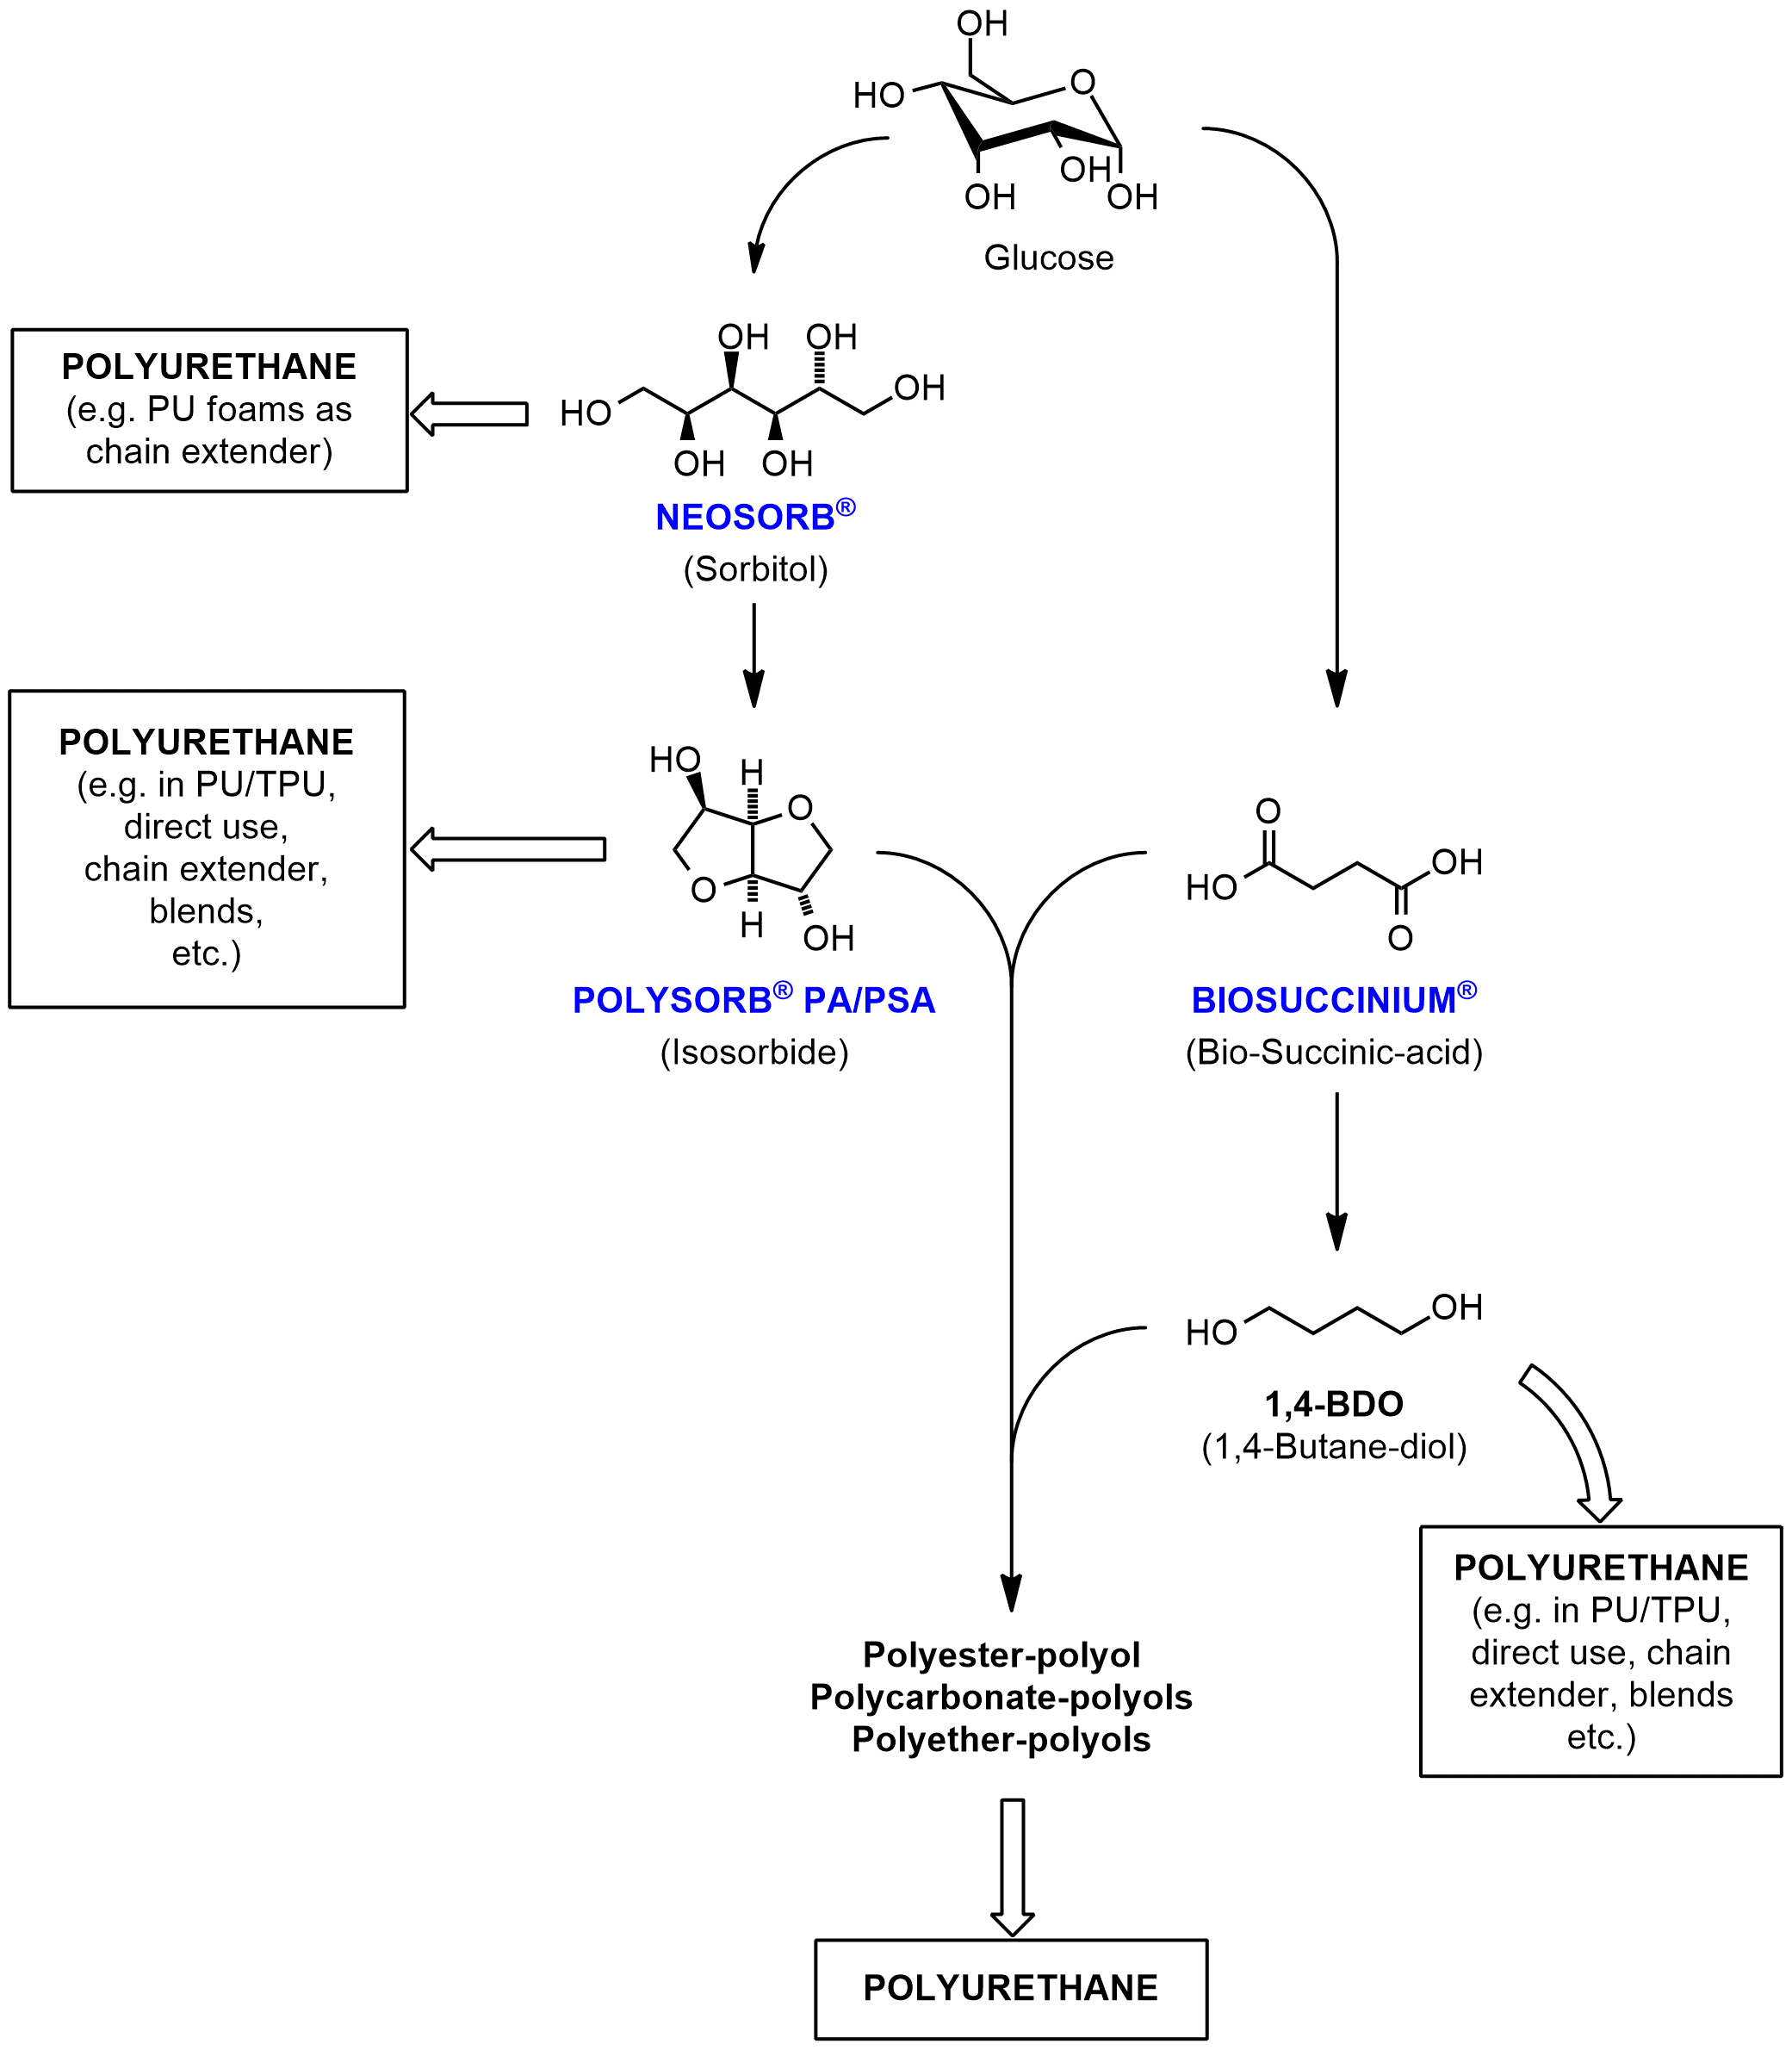 POLYSORB isosorbide is a low-molecular-weight diol that can play a range of different roles in PU chemistry. (NEOSORB sorbitol and BIOSUCCINIUM bio-succinic acid are additional products from the Roquette portfolio that PU chemists can use to synthesize more sustainable materials in polyurethanes.)